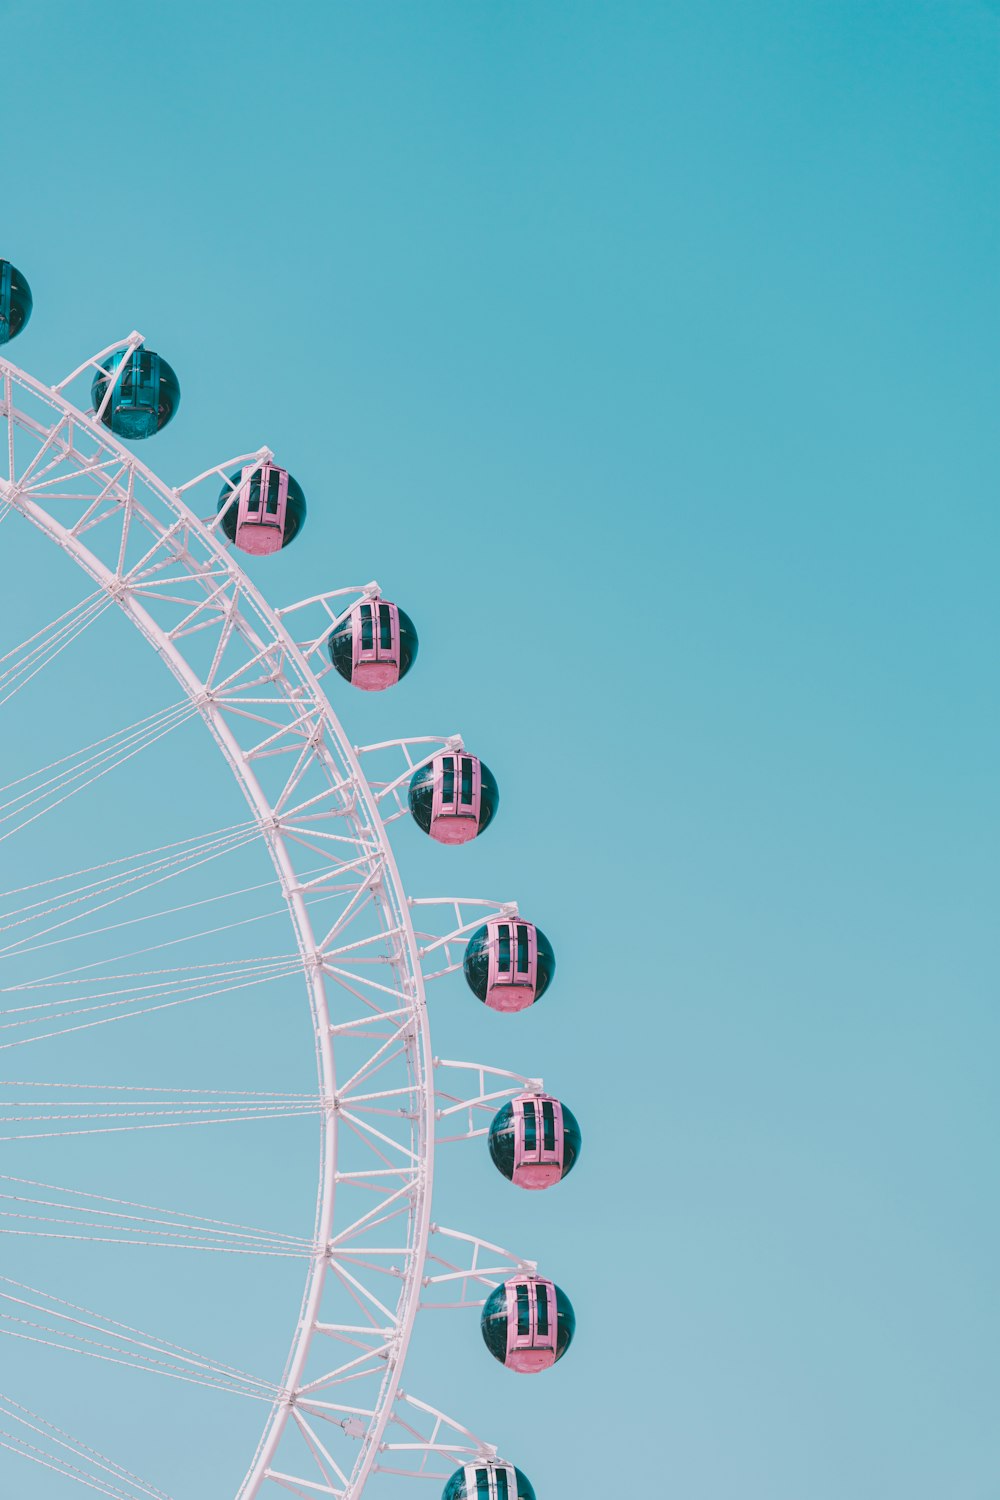 a ferris wheel with pink and black seats